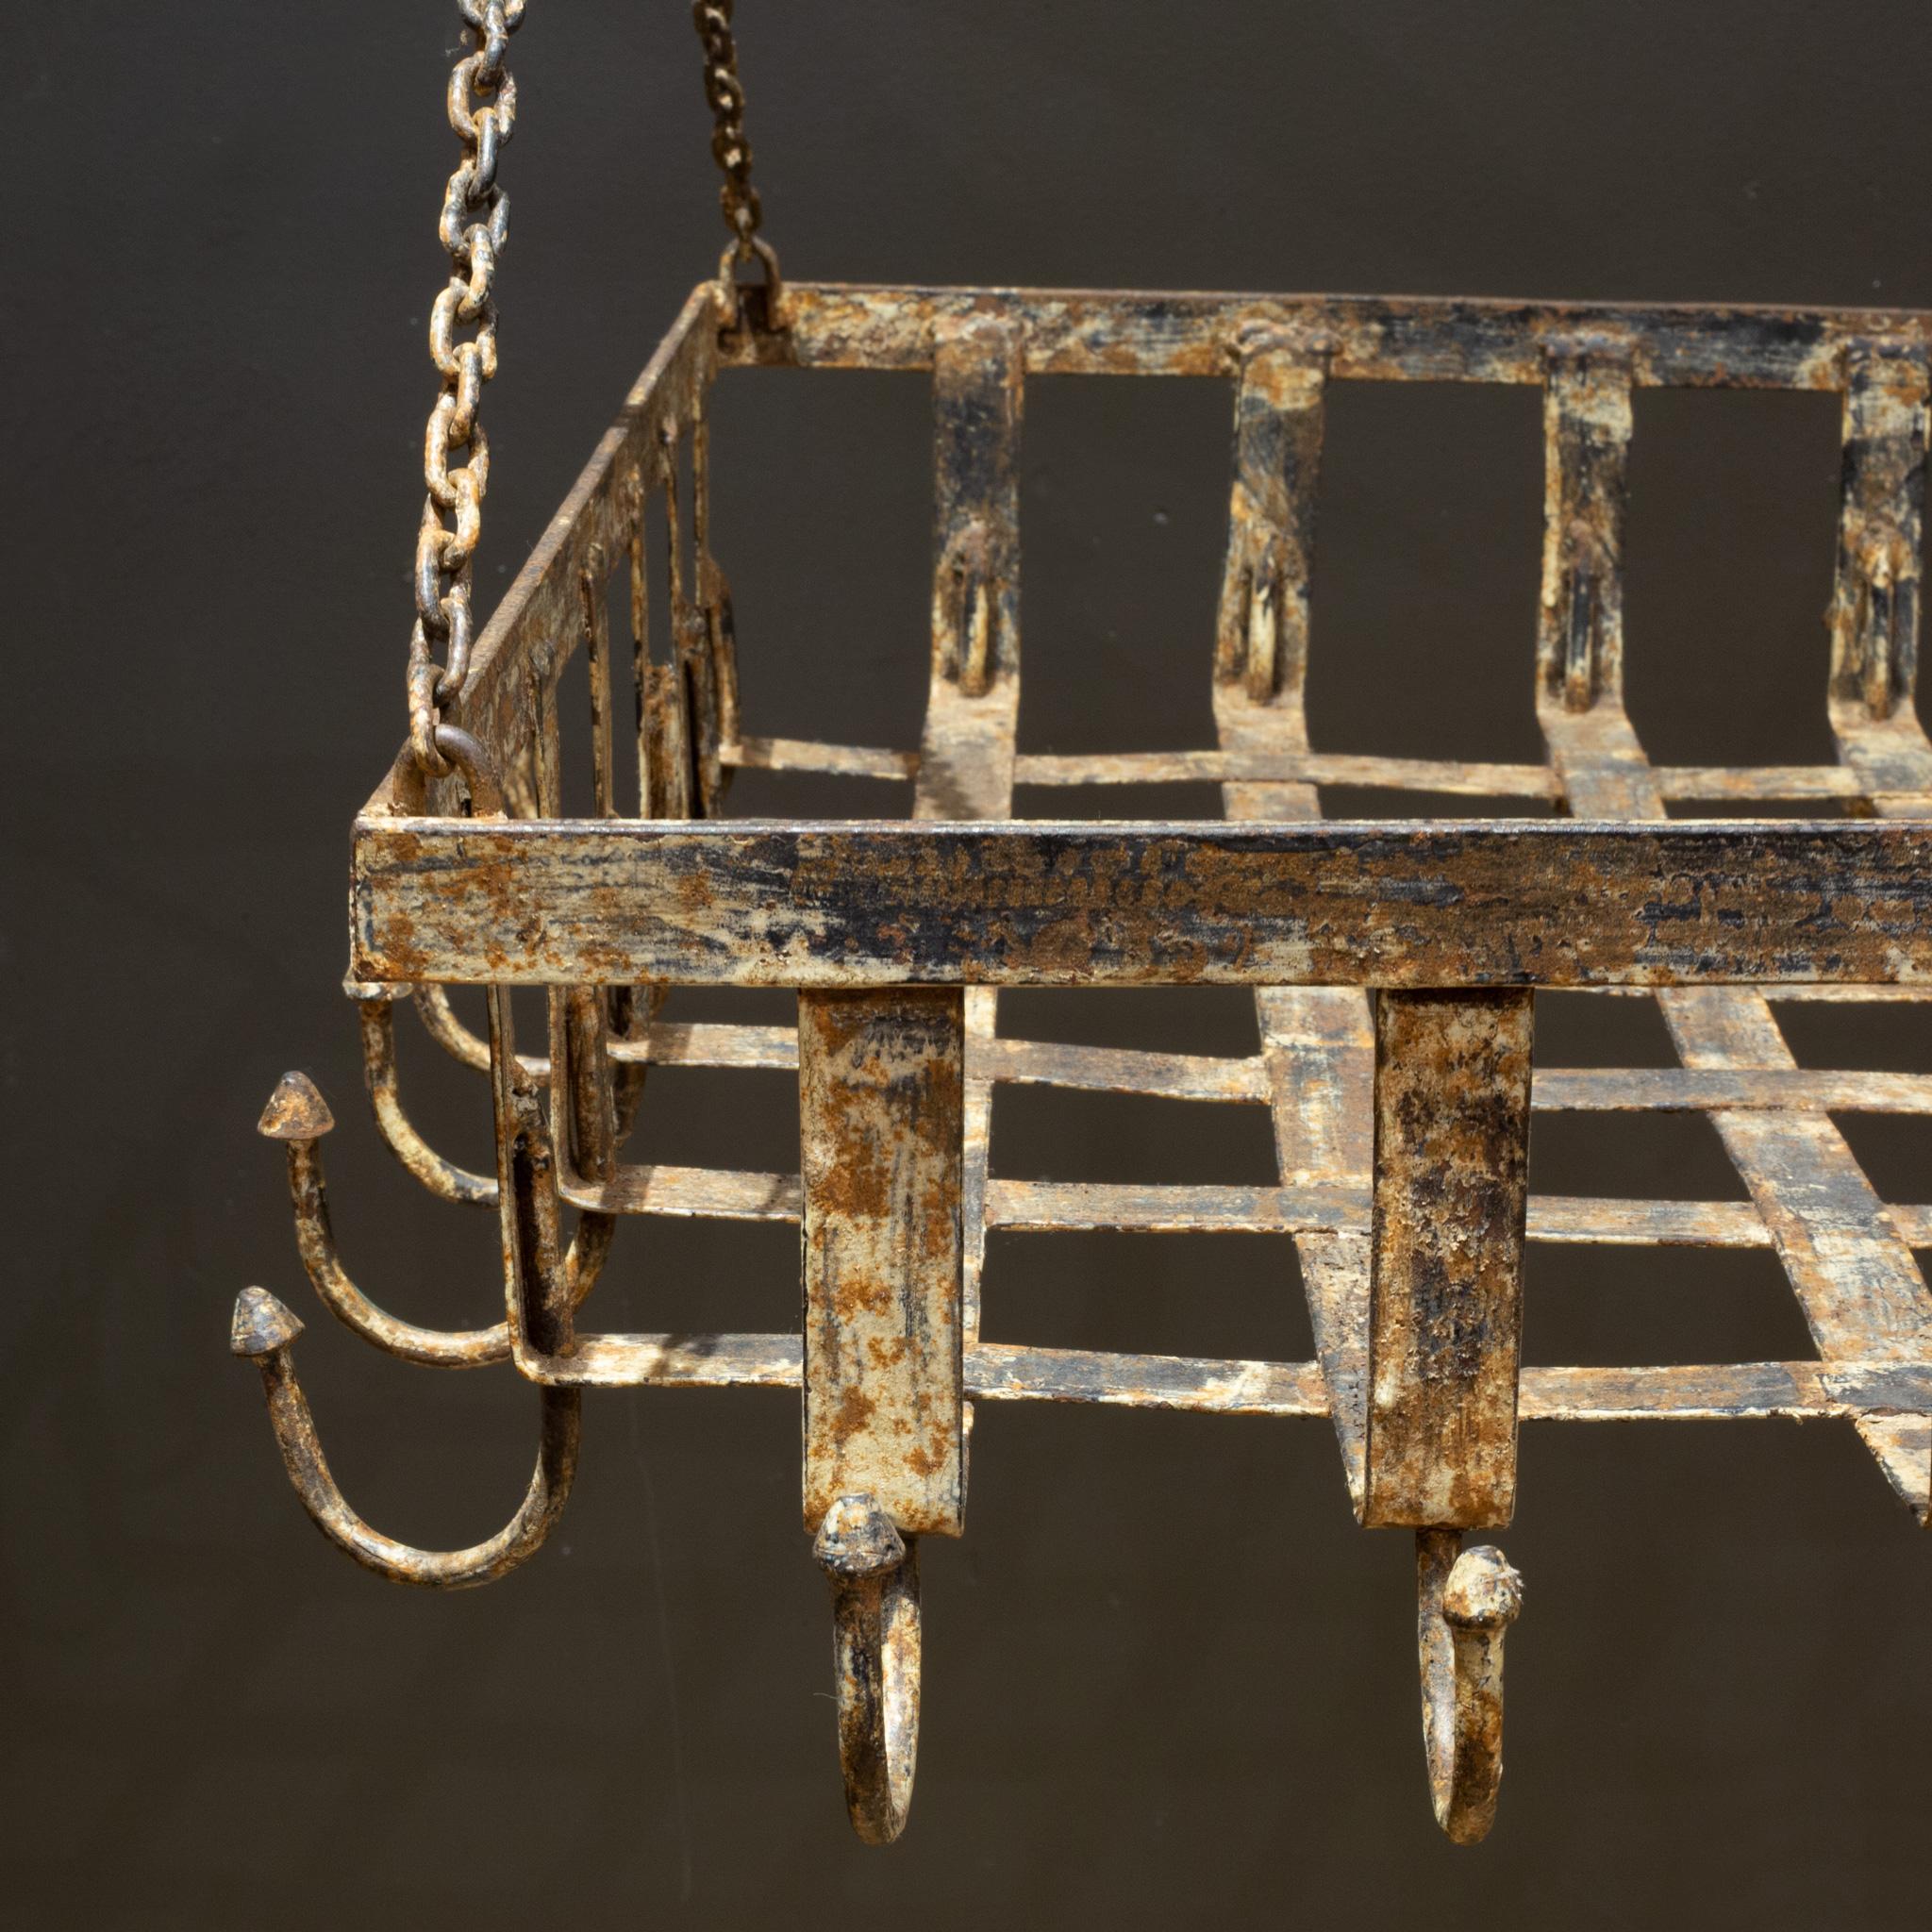 ABOUT

A large rectangular, wrought iron pot rack with lattice frame and 34 hooks. Four chains, one on each corner. Can be hung by each chain or bring together in the center.

    CREATOR Unknown.
    DATE OF MANUFACTURE c.1920-1940.
    MATERIALS